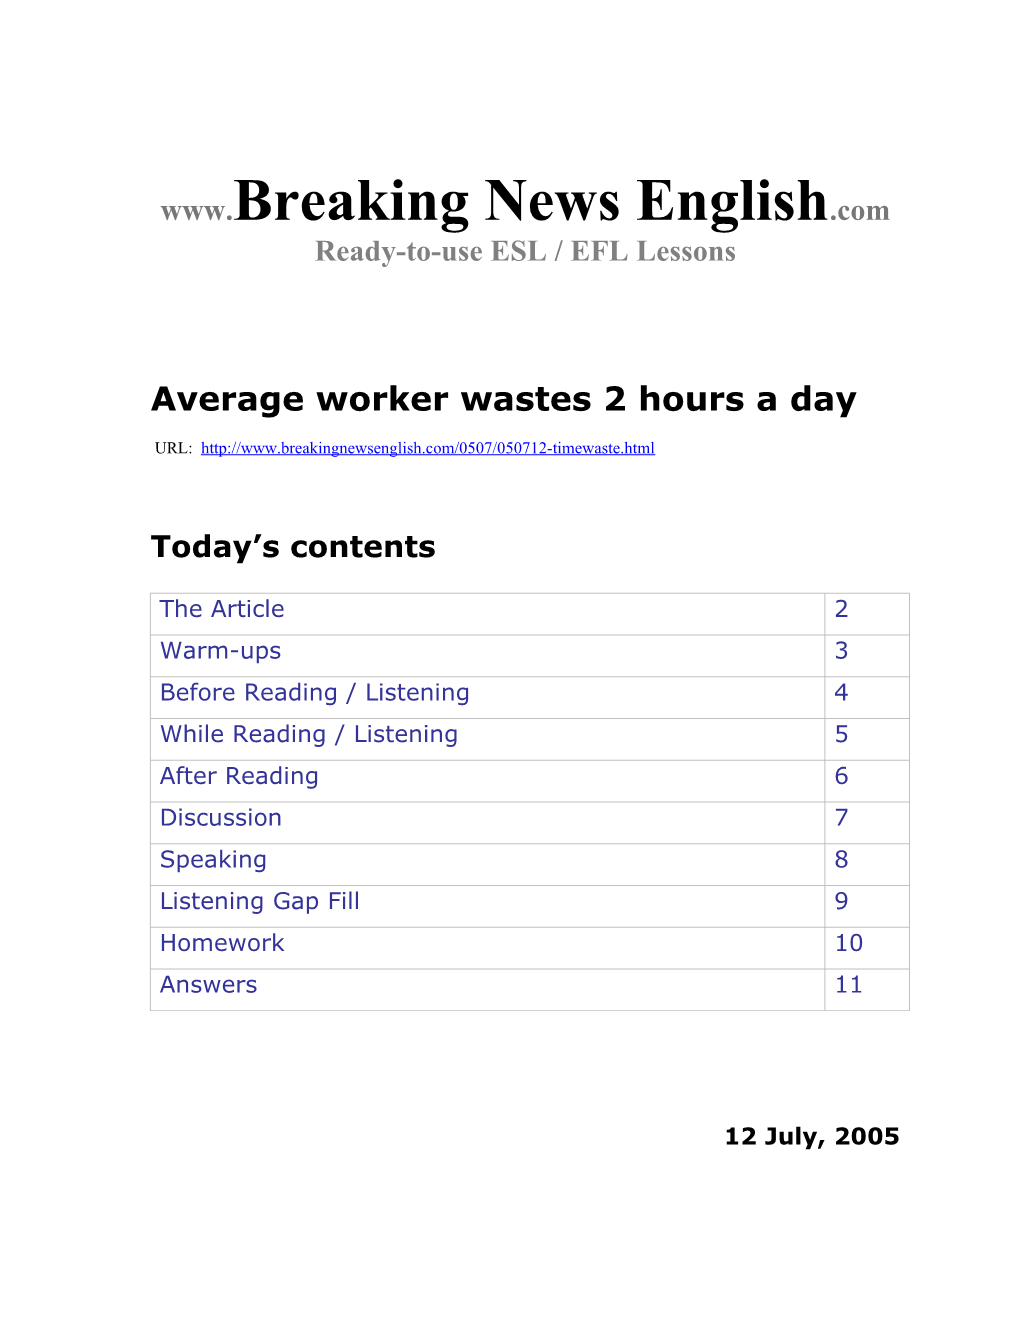 Average Worker Wastes 2 Hours a Day